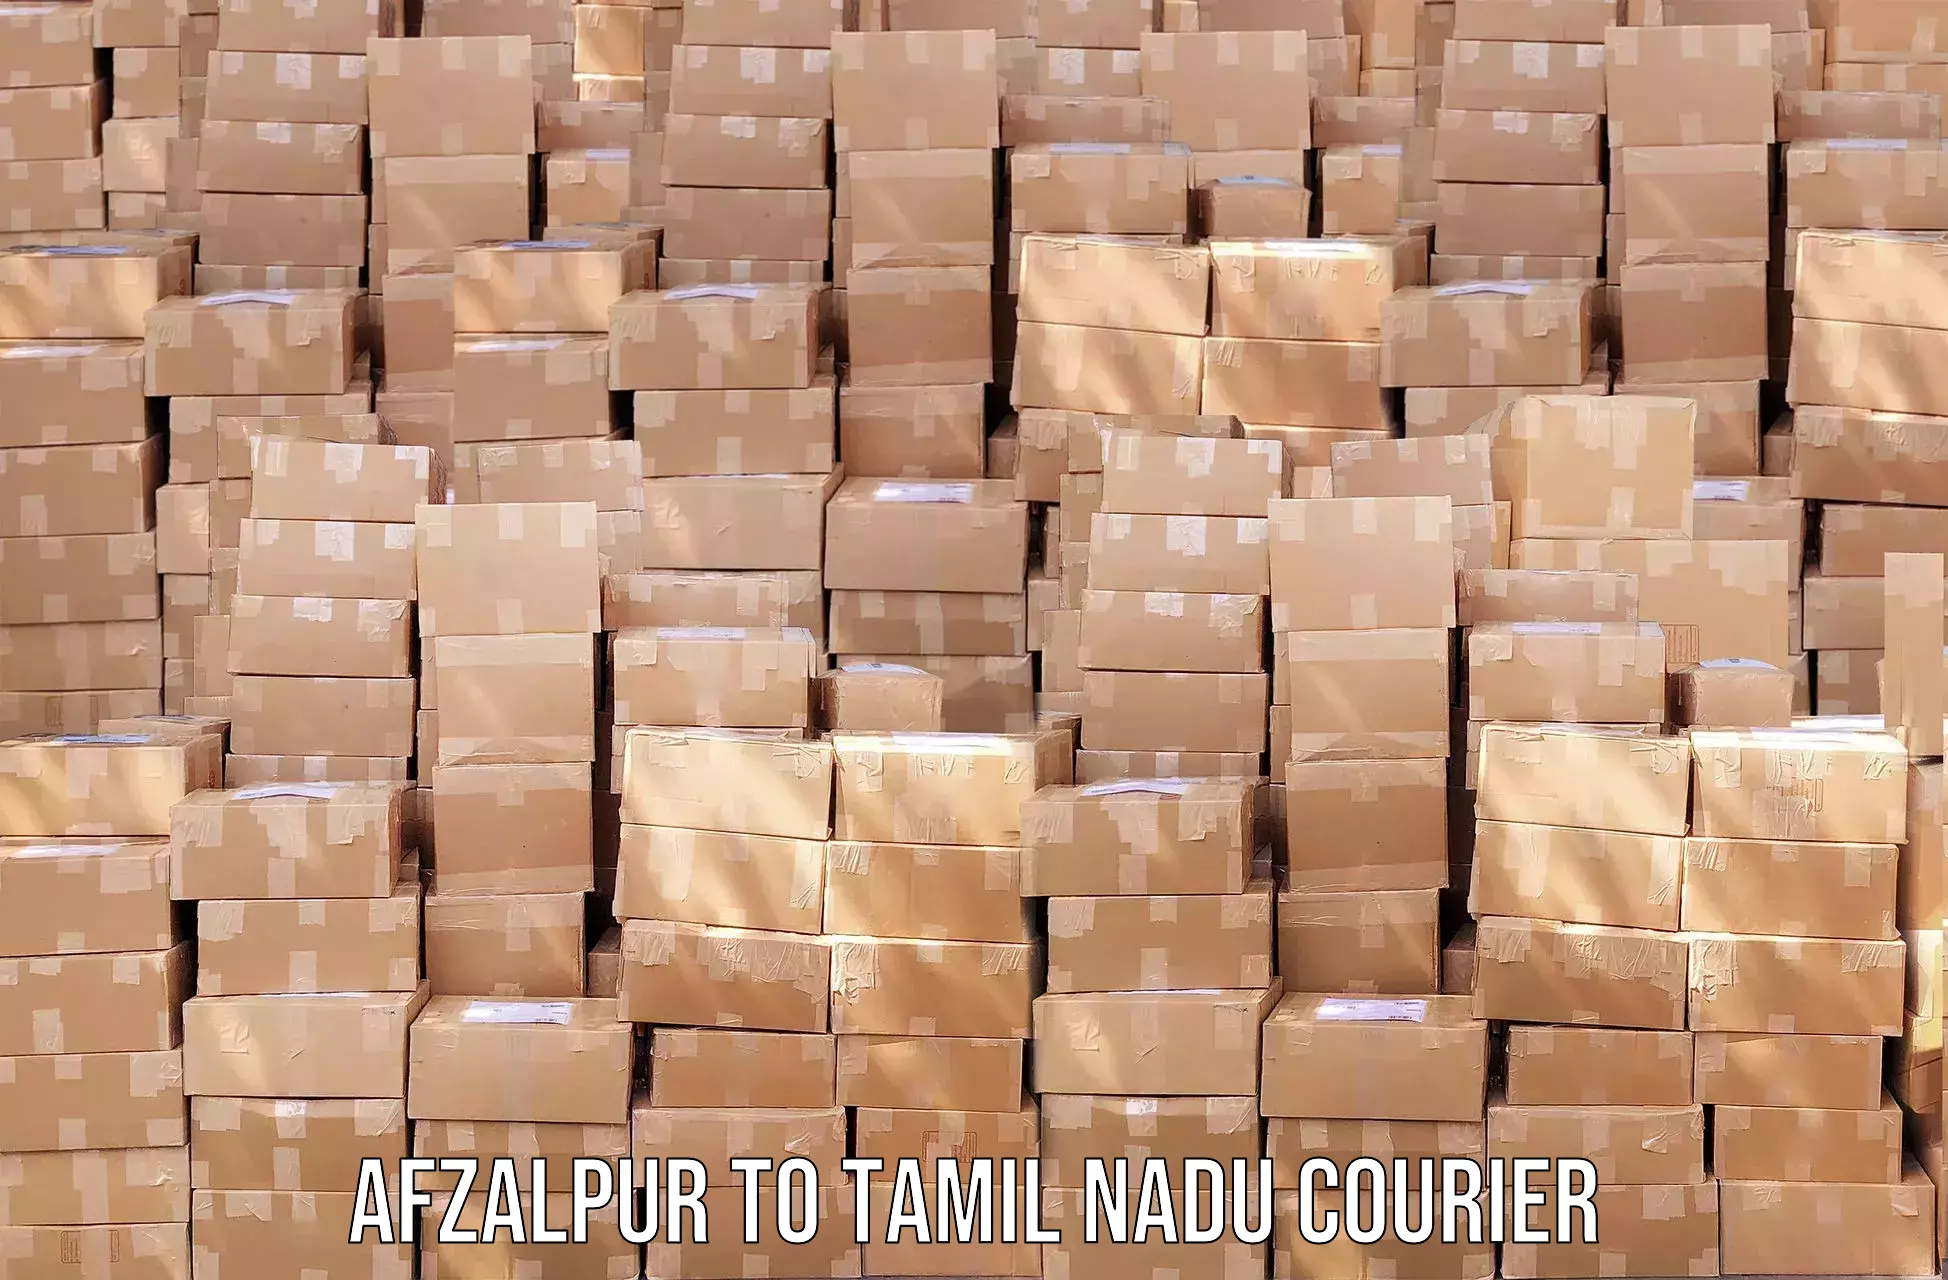 International courier networks Afzalpur to Avadi